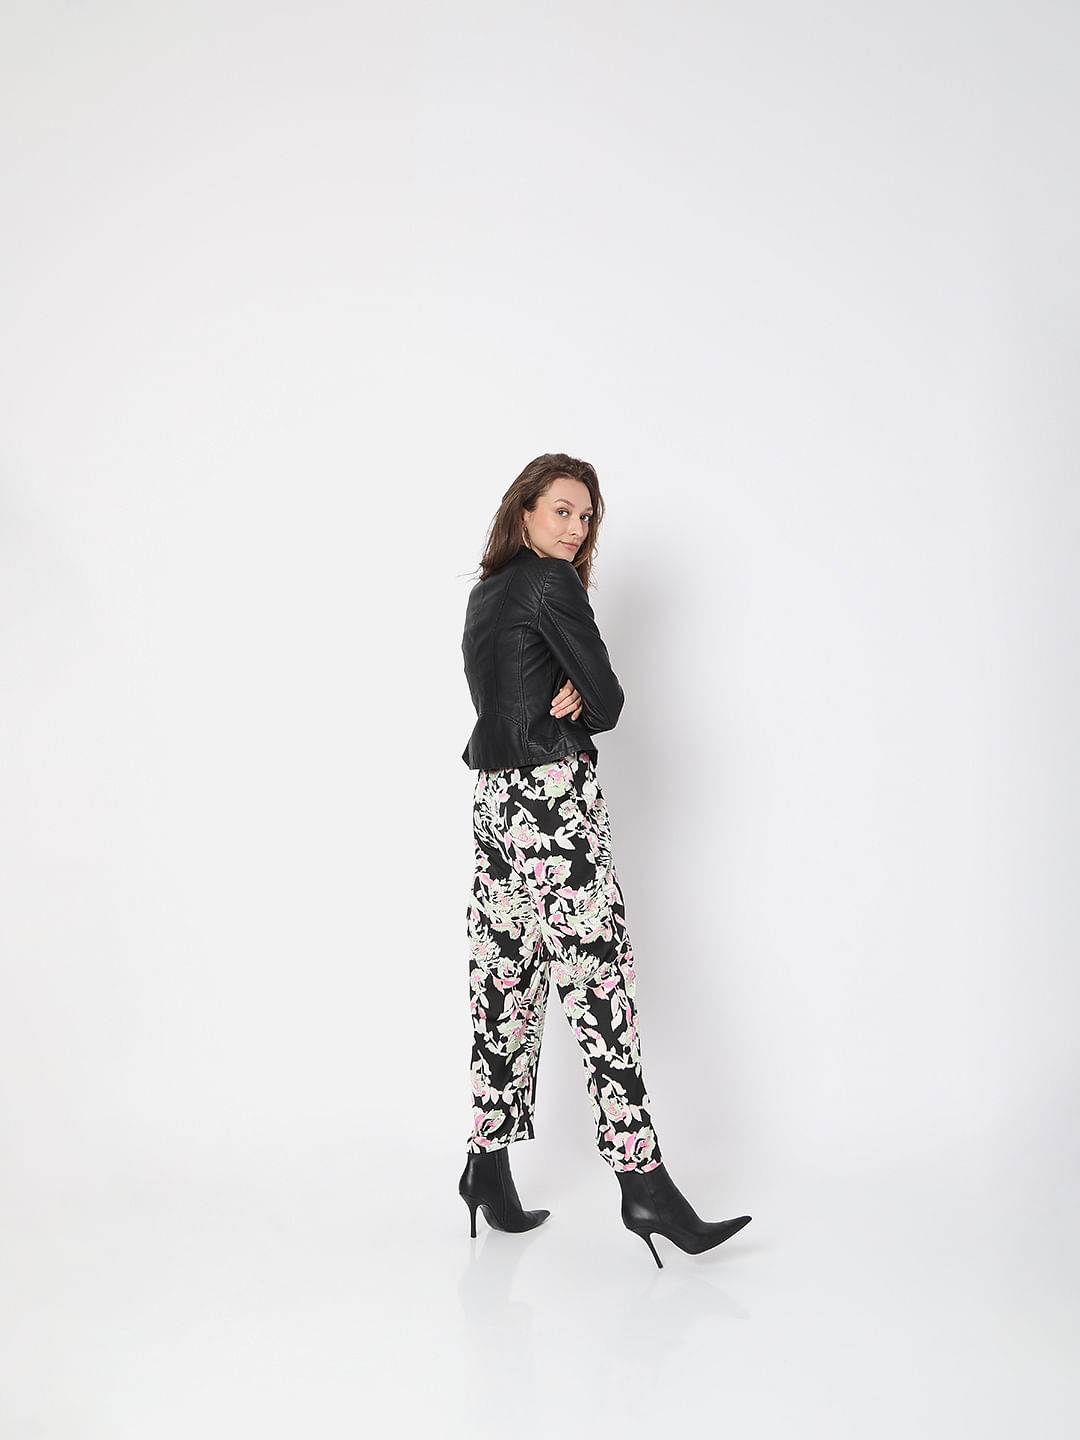 Buy Arrow Sports Low Rise Printed Trousers - NNNOW.com